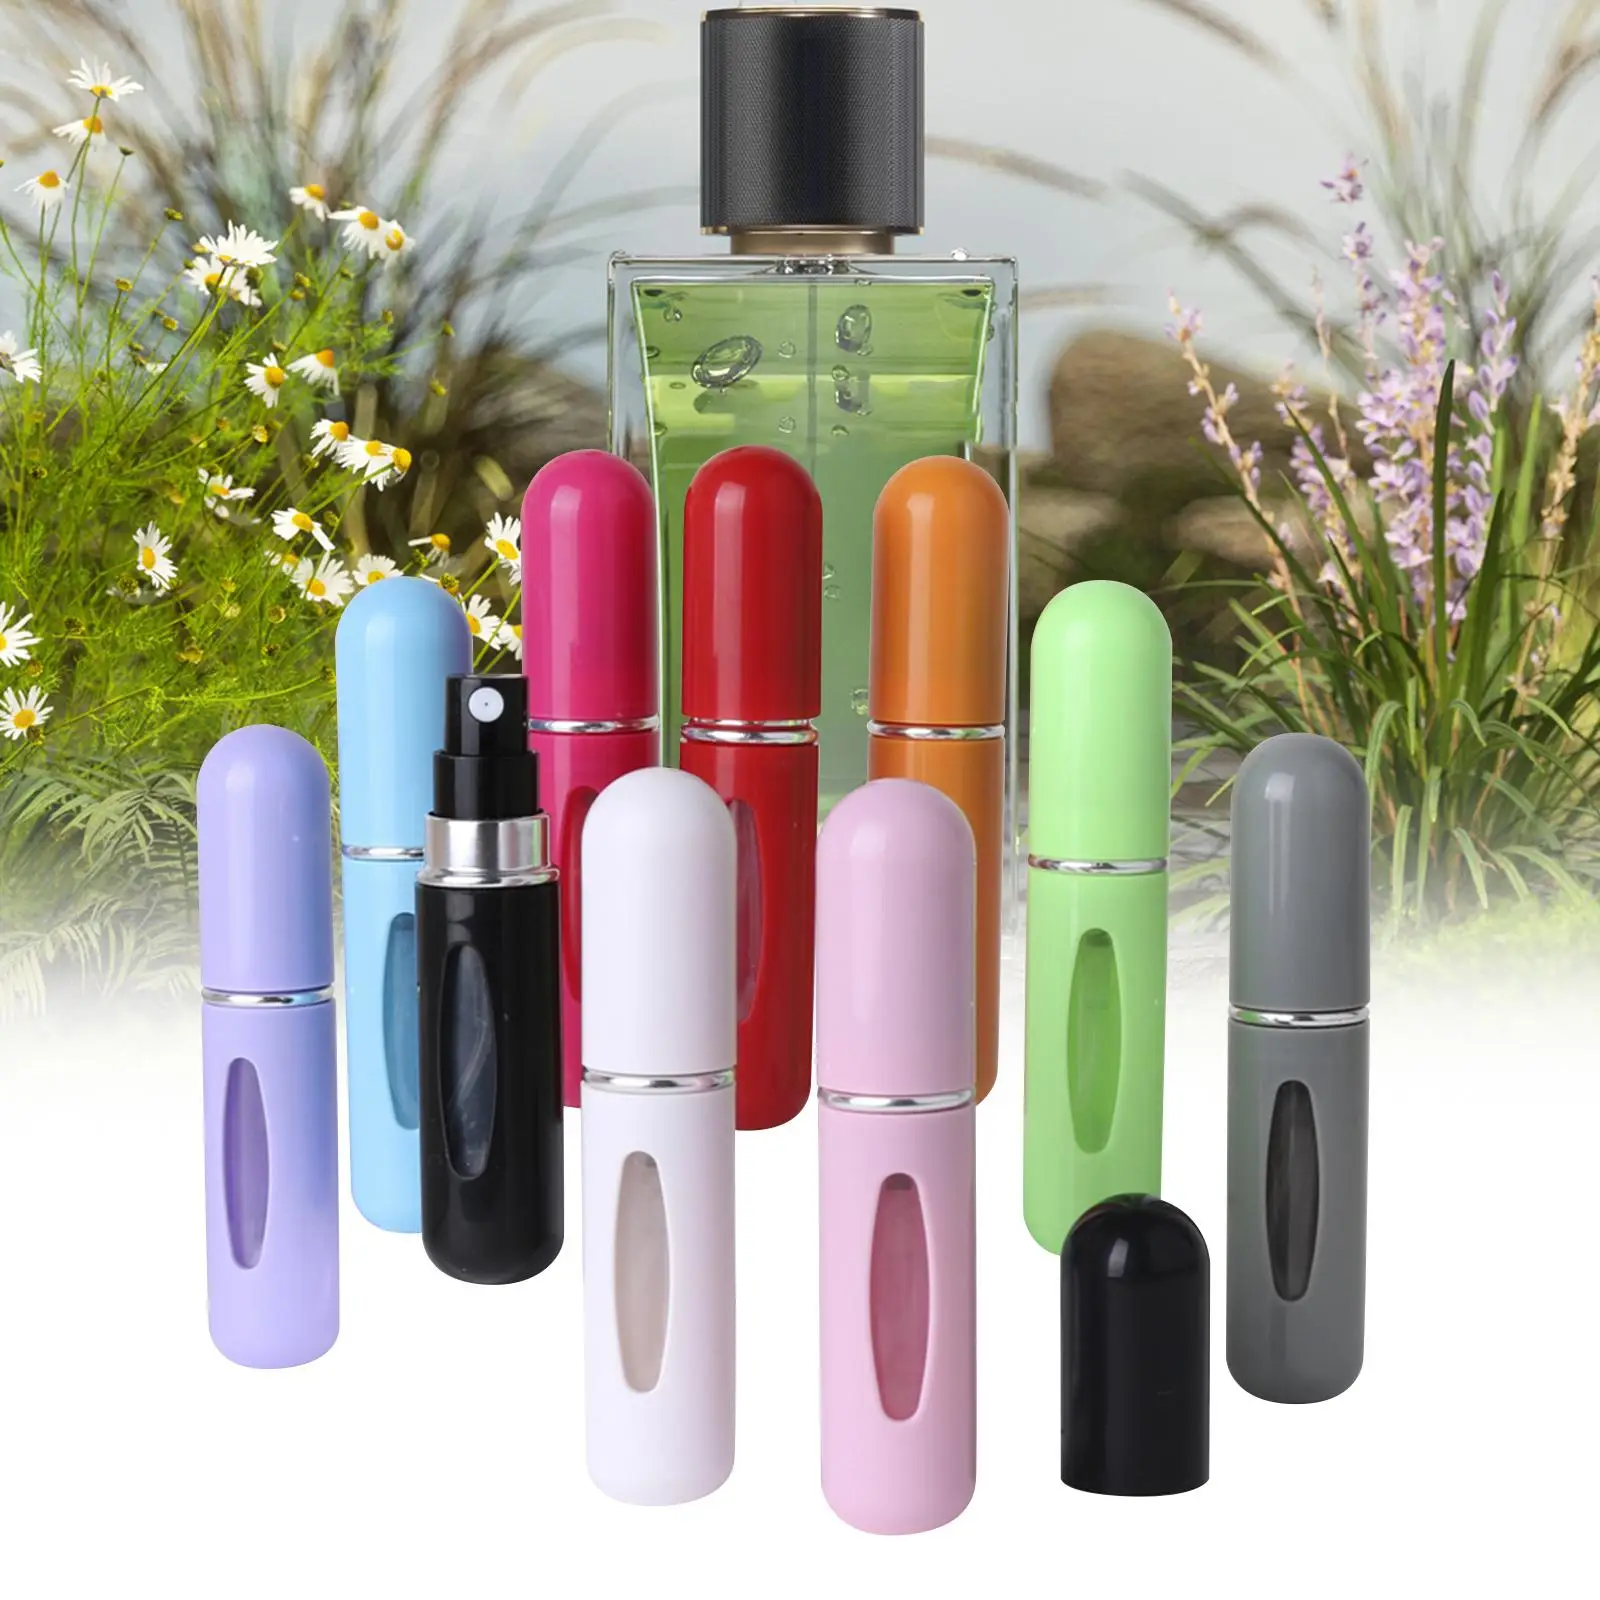 10x 5ml Refillable Perfume Bottle Travel Essentials Mist Sprayer for Aftershave Perfume Cosmetic Cream Lotion Foundation Cologne